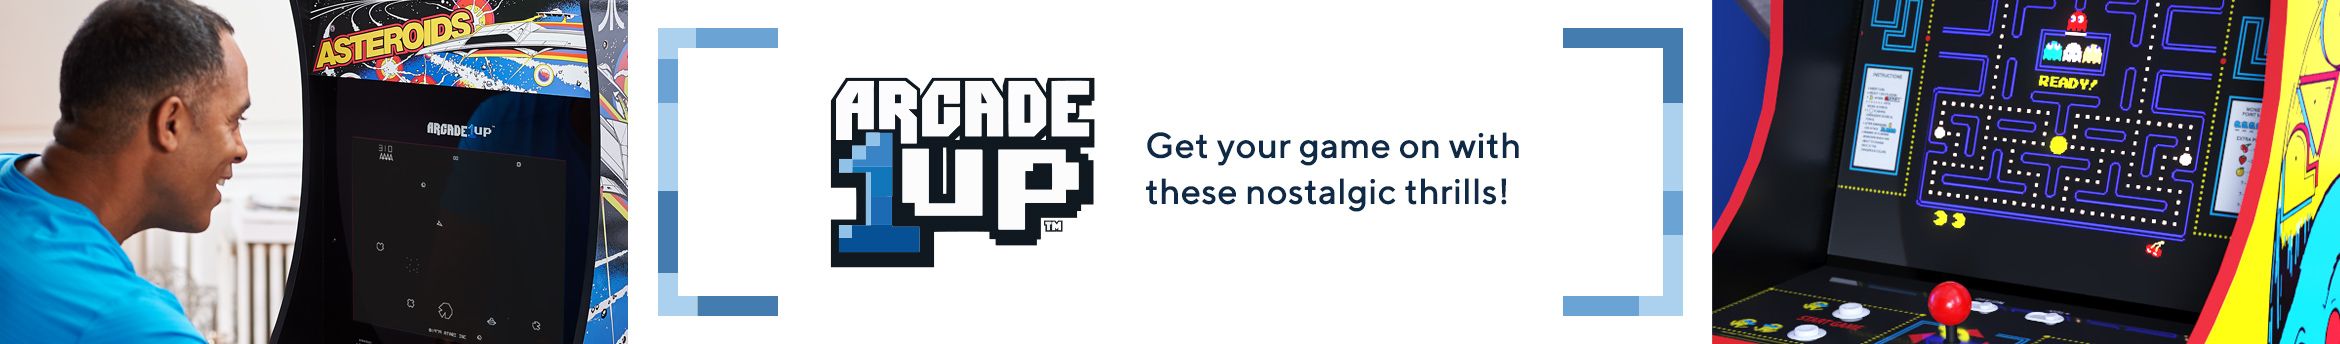 Arcade1Up: Get your game on with these nostalgic thrills!